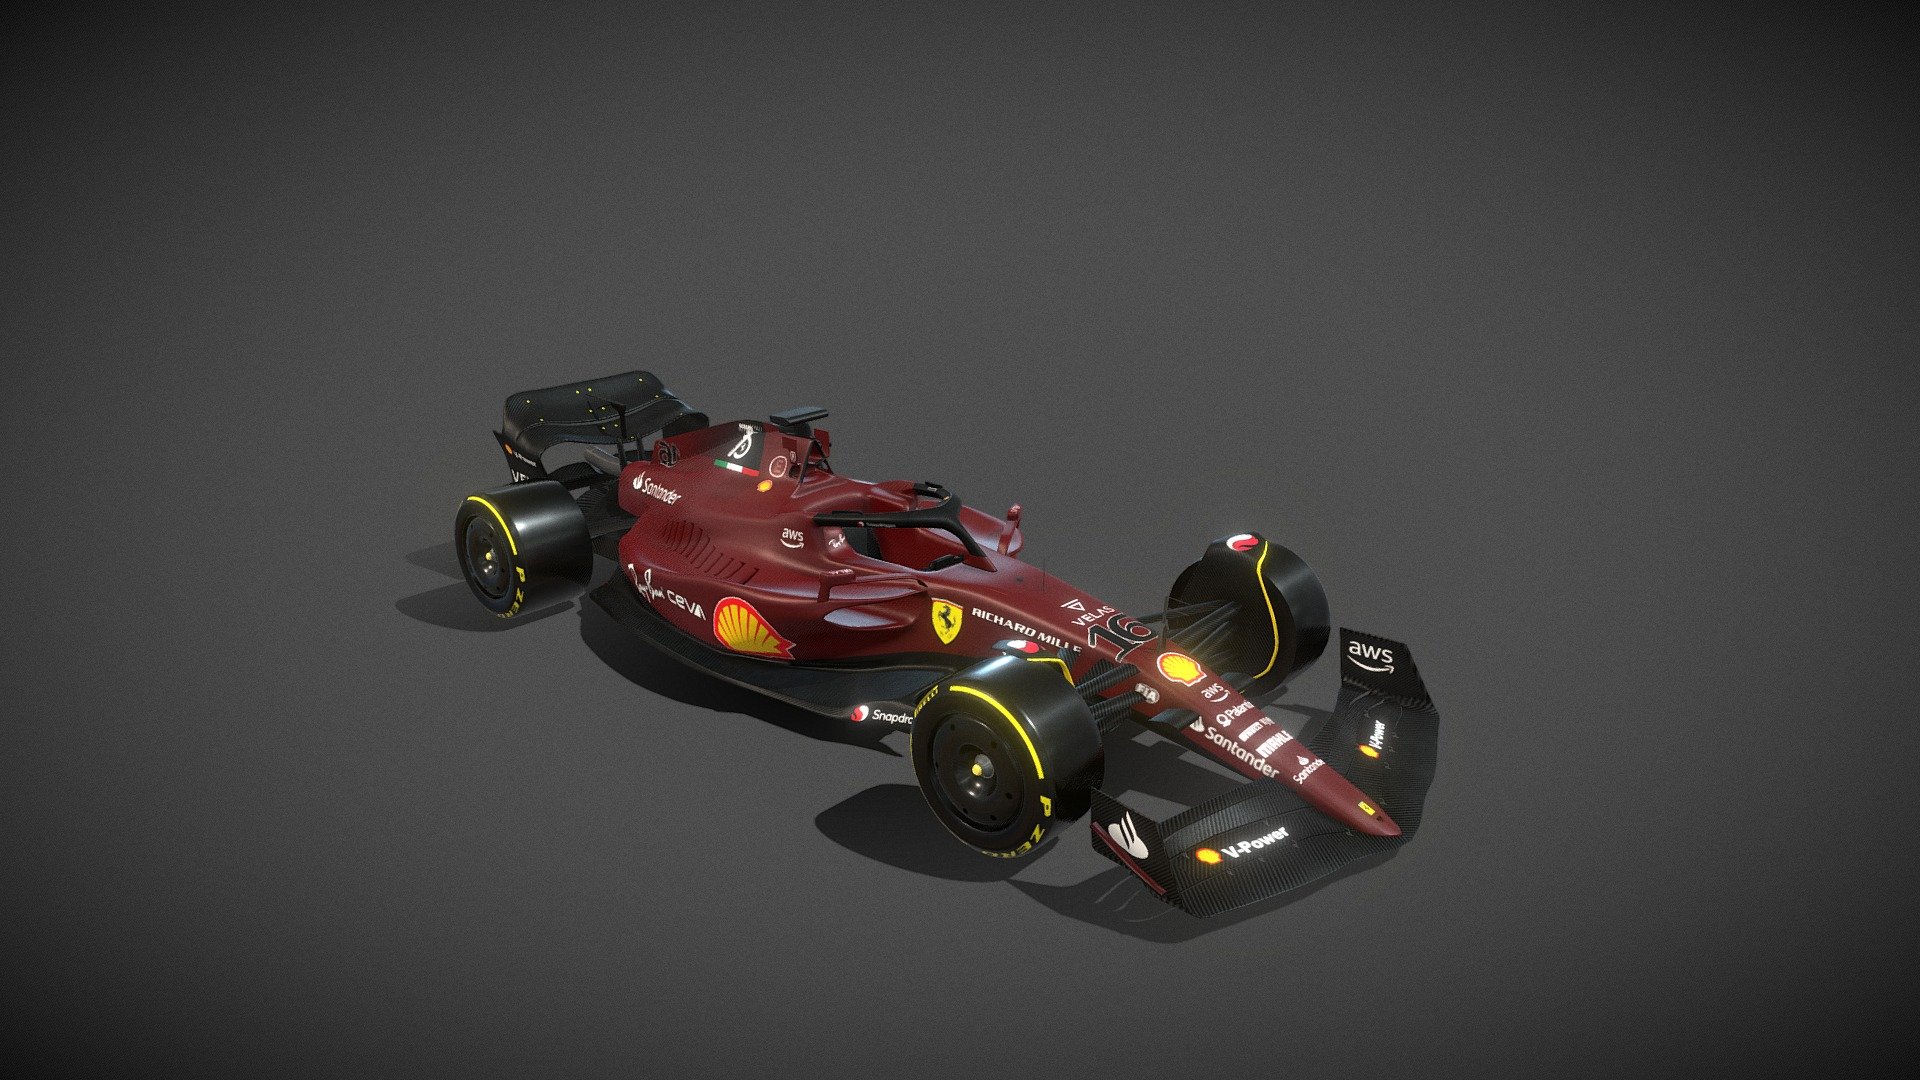 uses a single 10241024 diffuse AND specular texture  High poly* that is subdivied Rigged with Parented Empties (compatible with blender) F1-75 Scuderia Ferrari 2022 Charles Leclerc
Made this model for fun, If you need anything similar don’t hesitate on contacting me 3d model